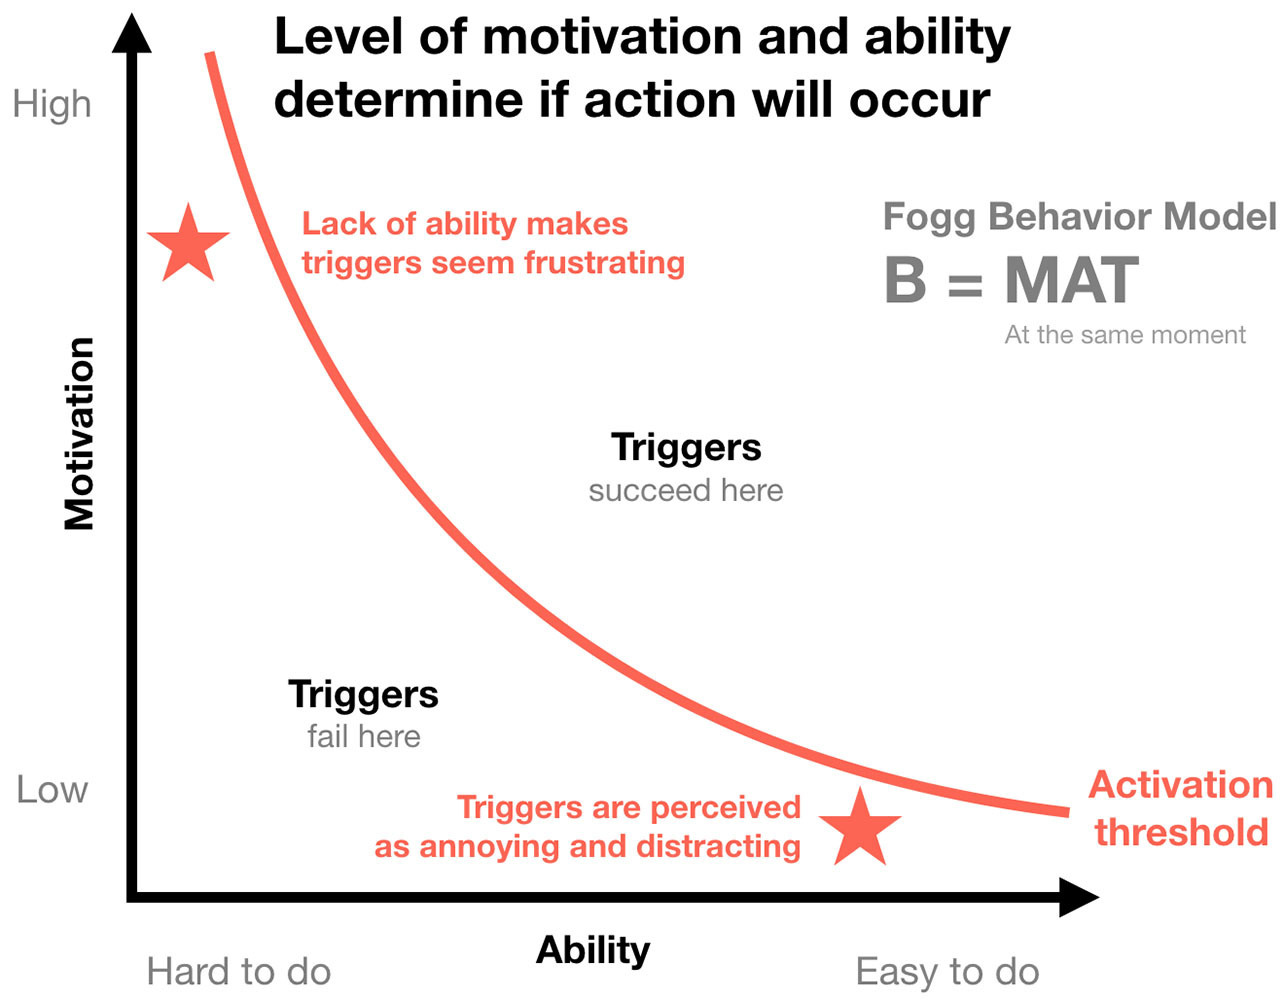 If something is easier to do, the behavior will be mapped to the right. If things are hard to do, the behavior will be mapped to the left. In the middle is an activation threshold. Triggers on the right side of the threshold succeed, triggers on the left side fail.